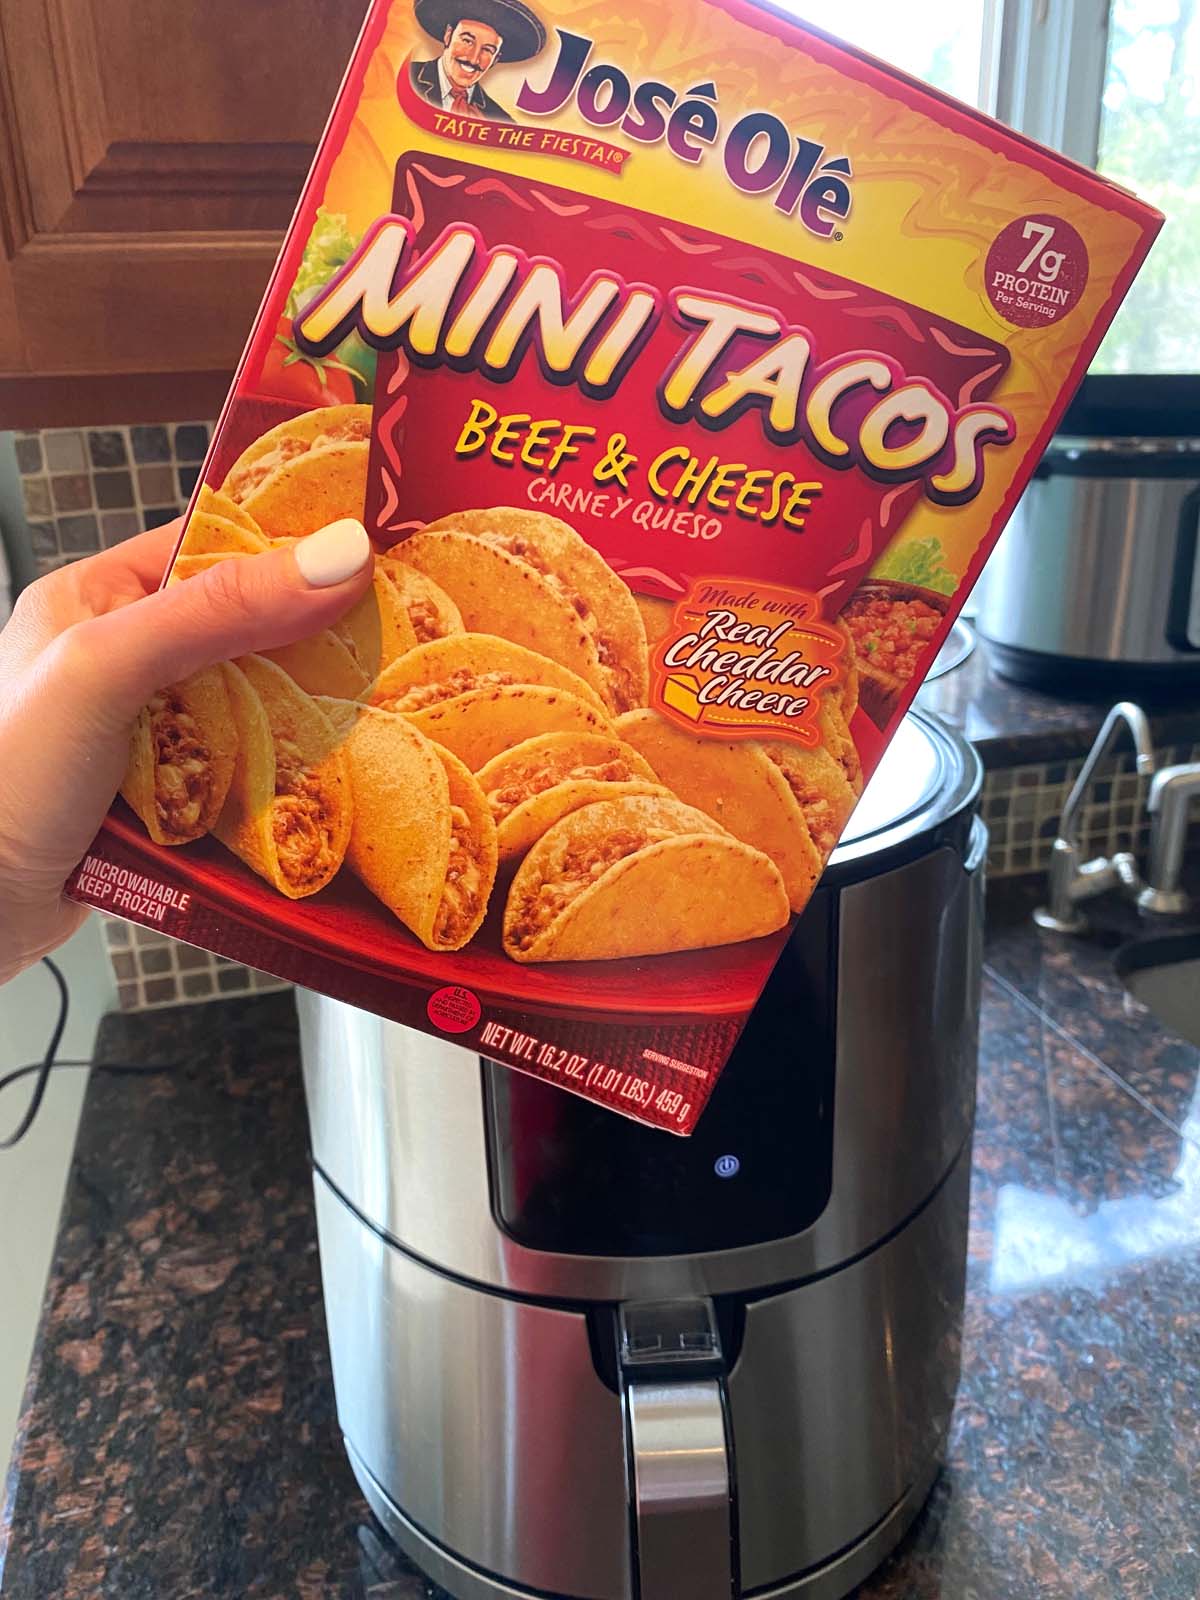 Hand holding a box of Jose Ole beef and cheese mini tacos in front of an air fryer.